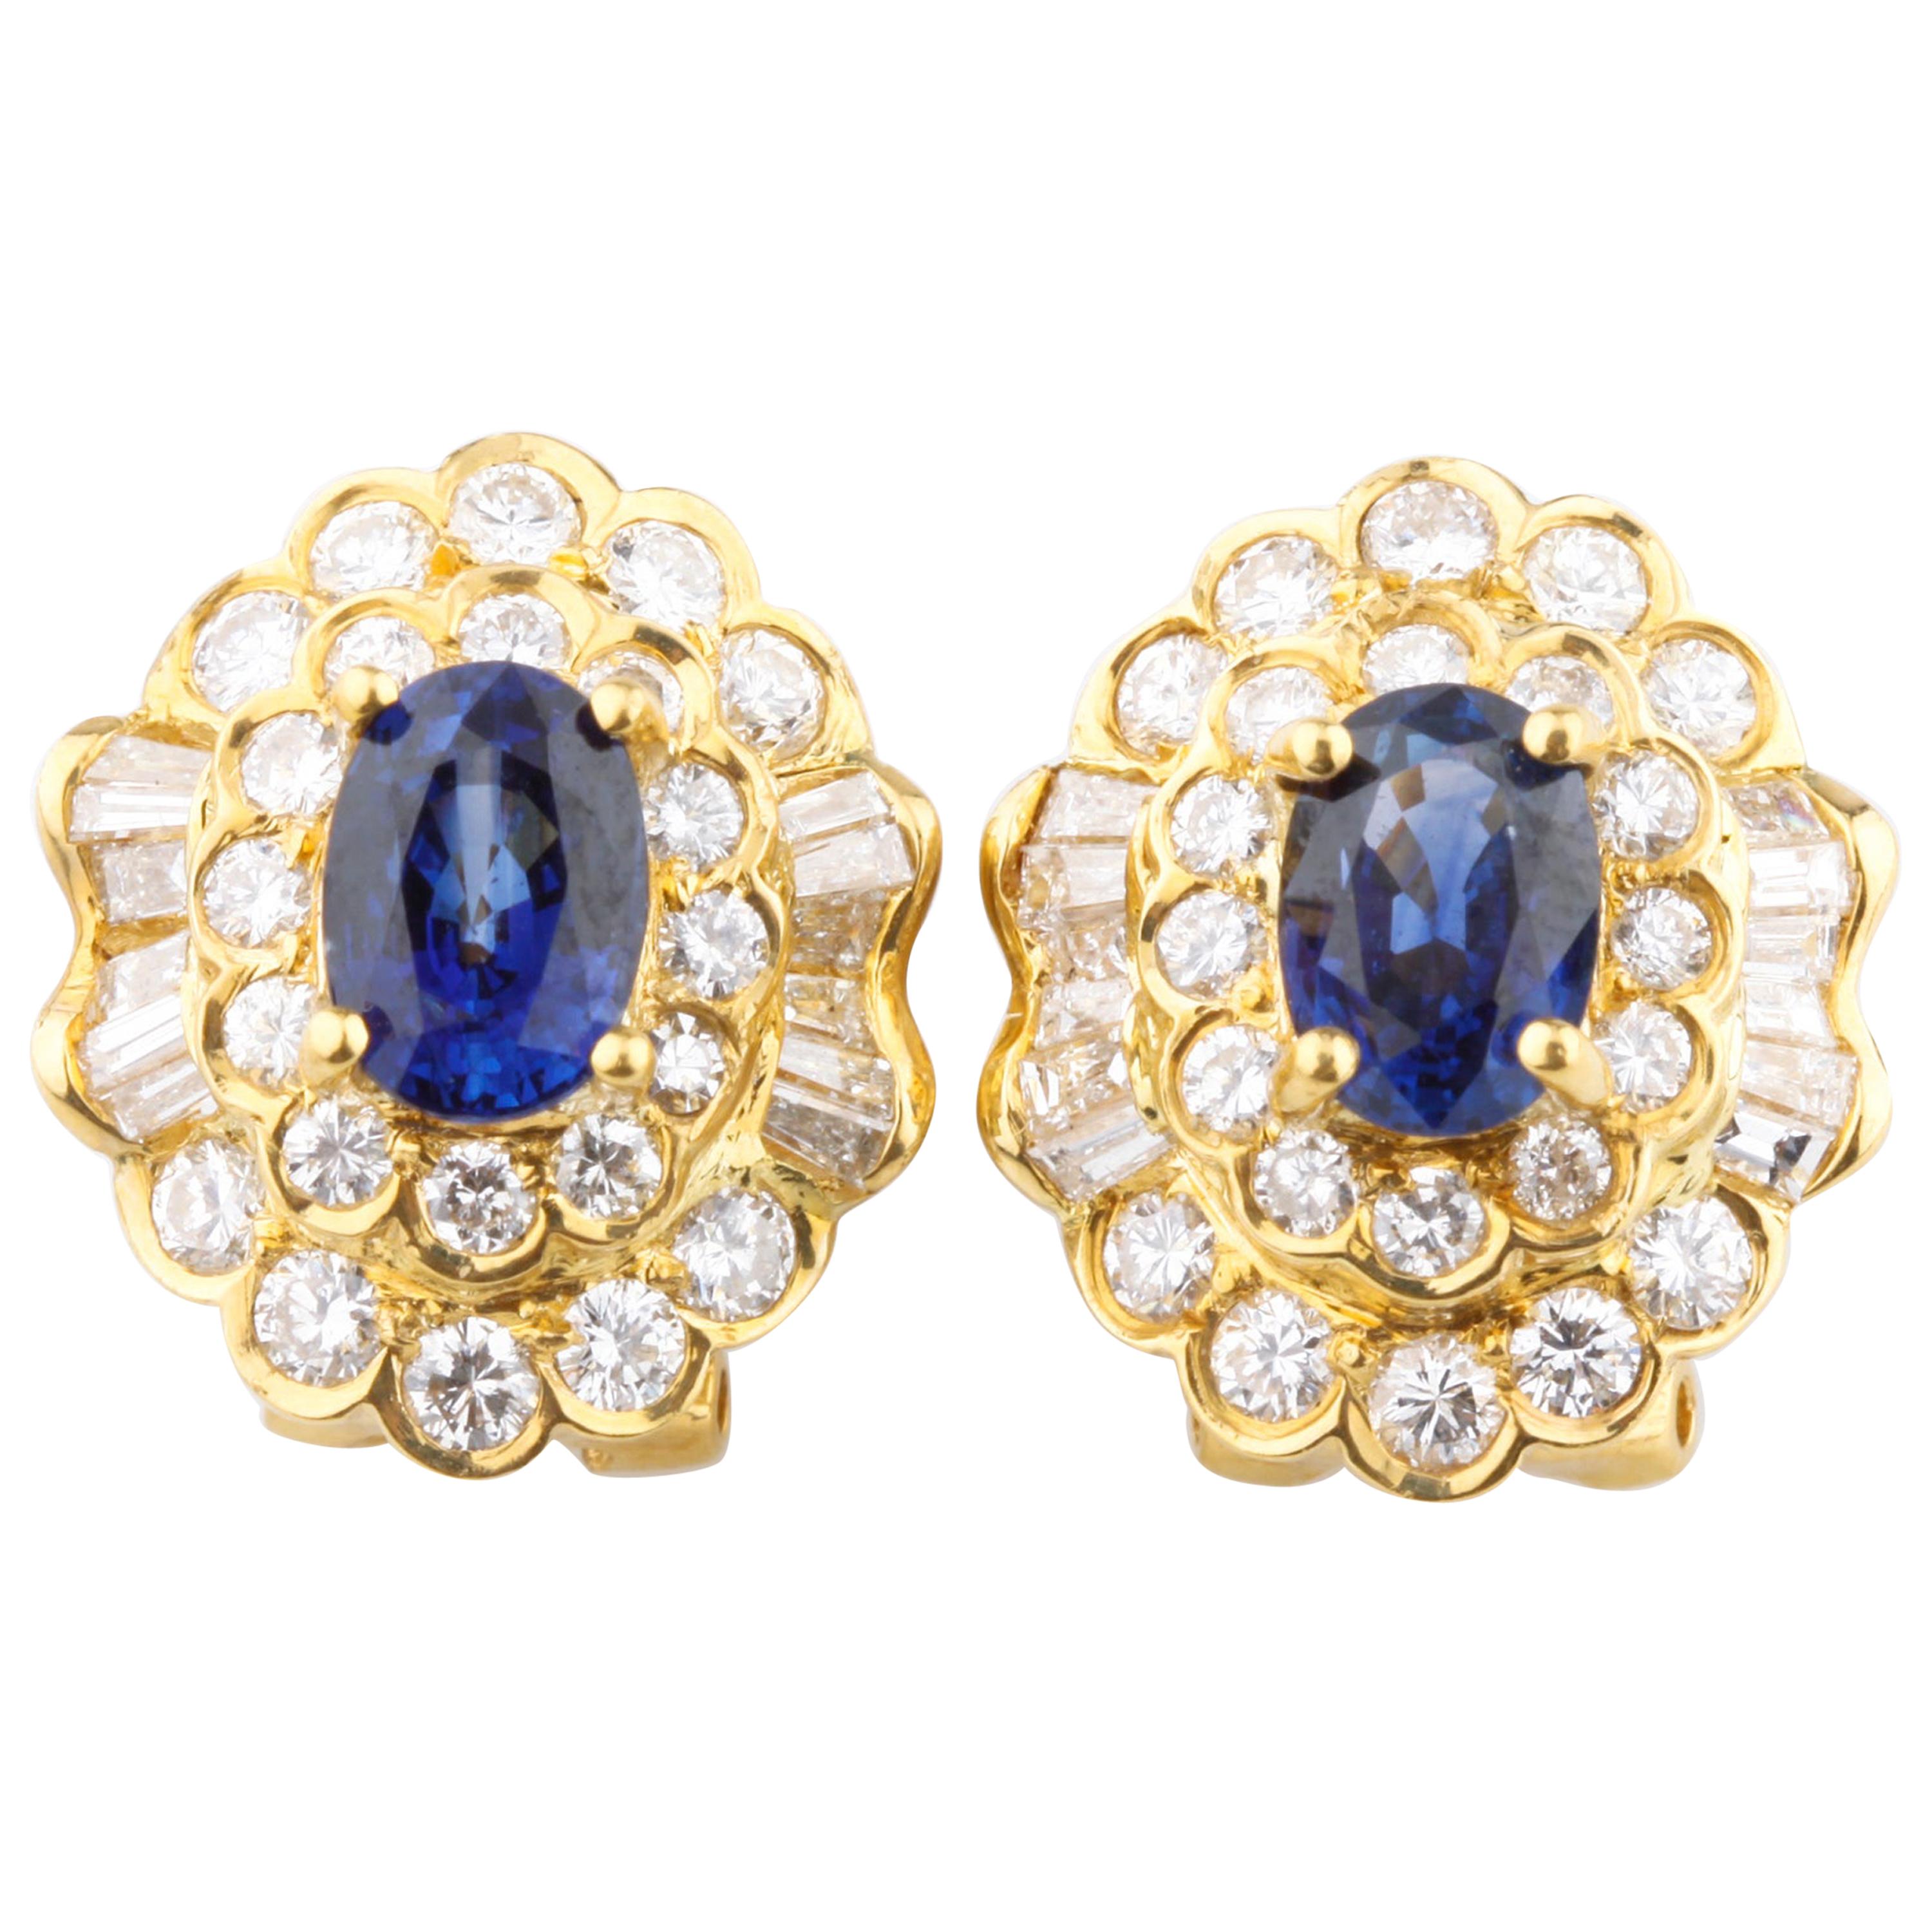 4 Carat Oval Natural Sapphire Huggie Earrings with Diamonds in Yellow Gold